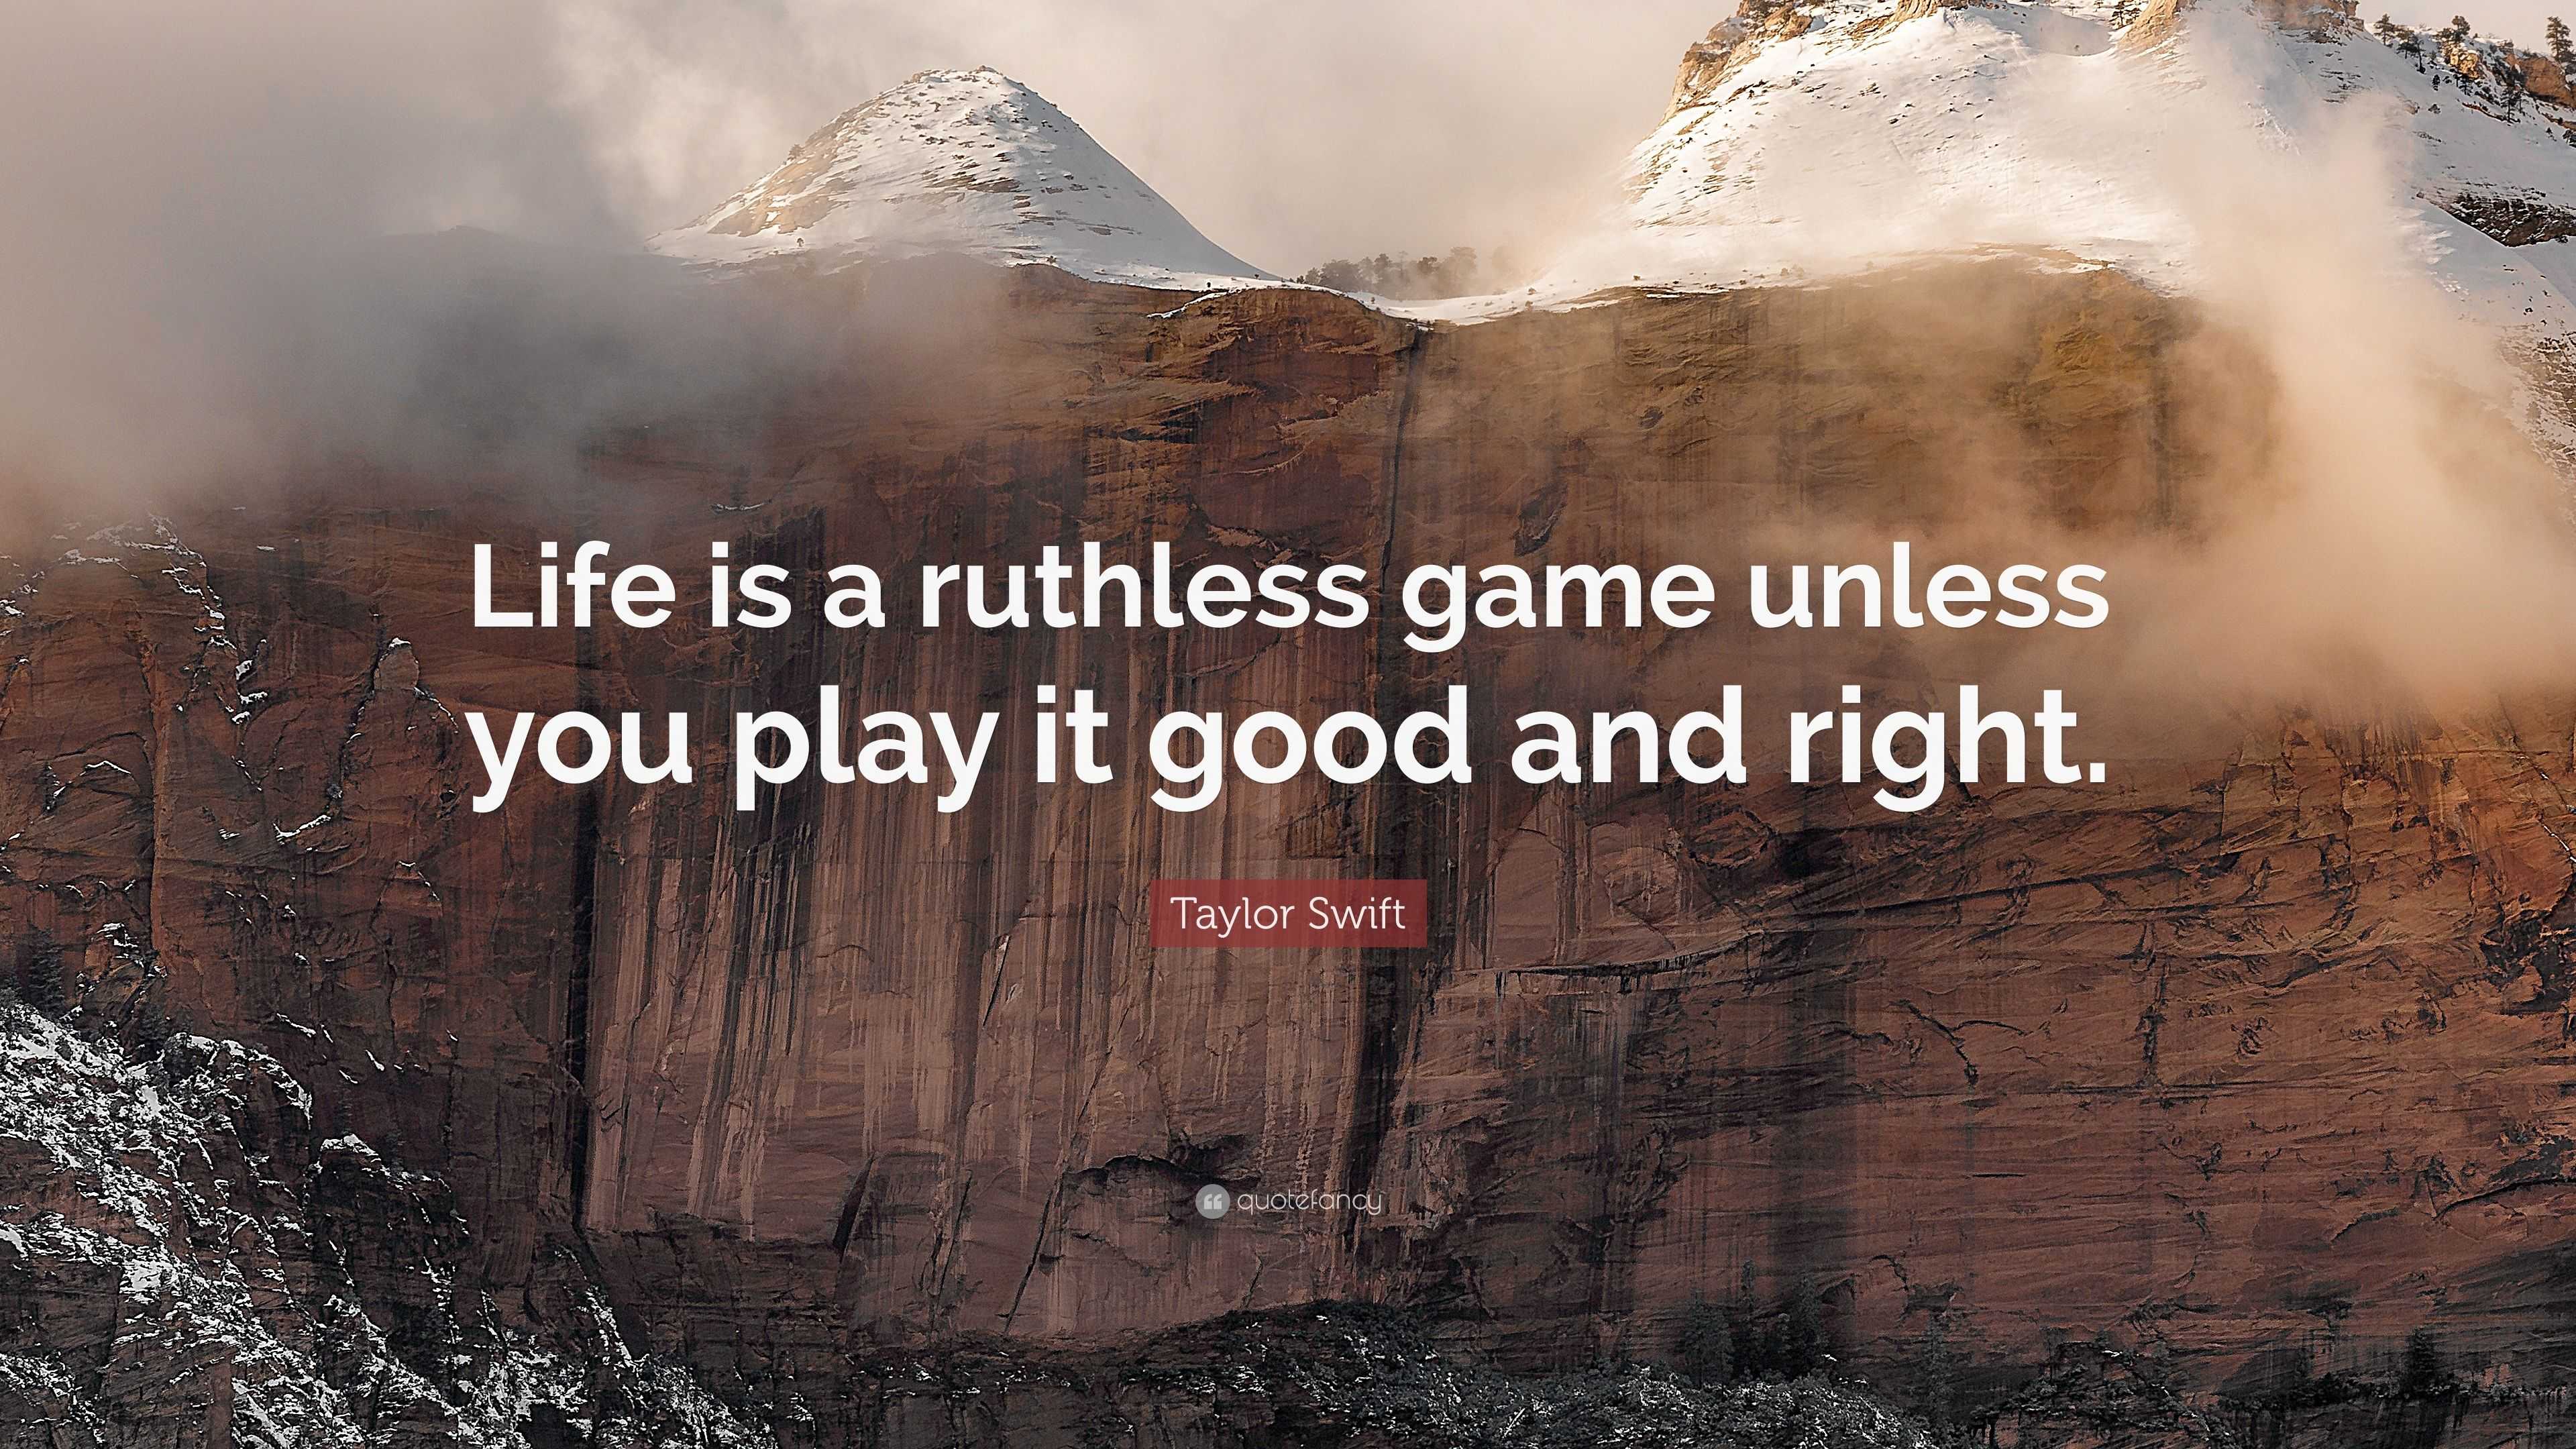 Taylor Swift quote: Life is a ruthless game unless you play it good